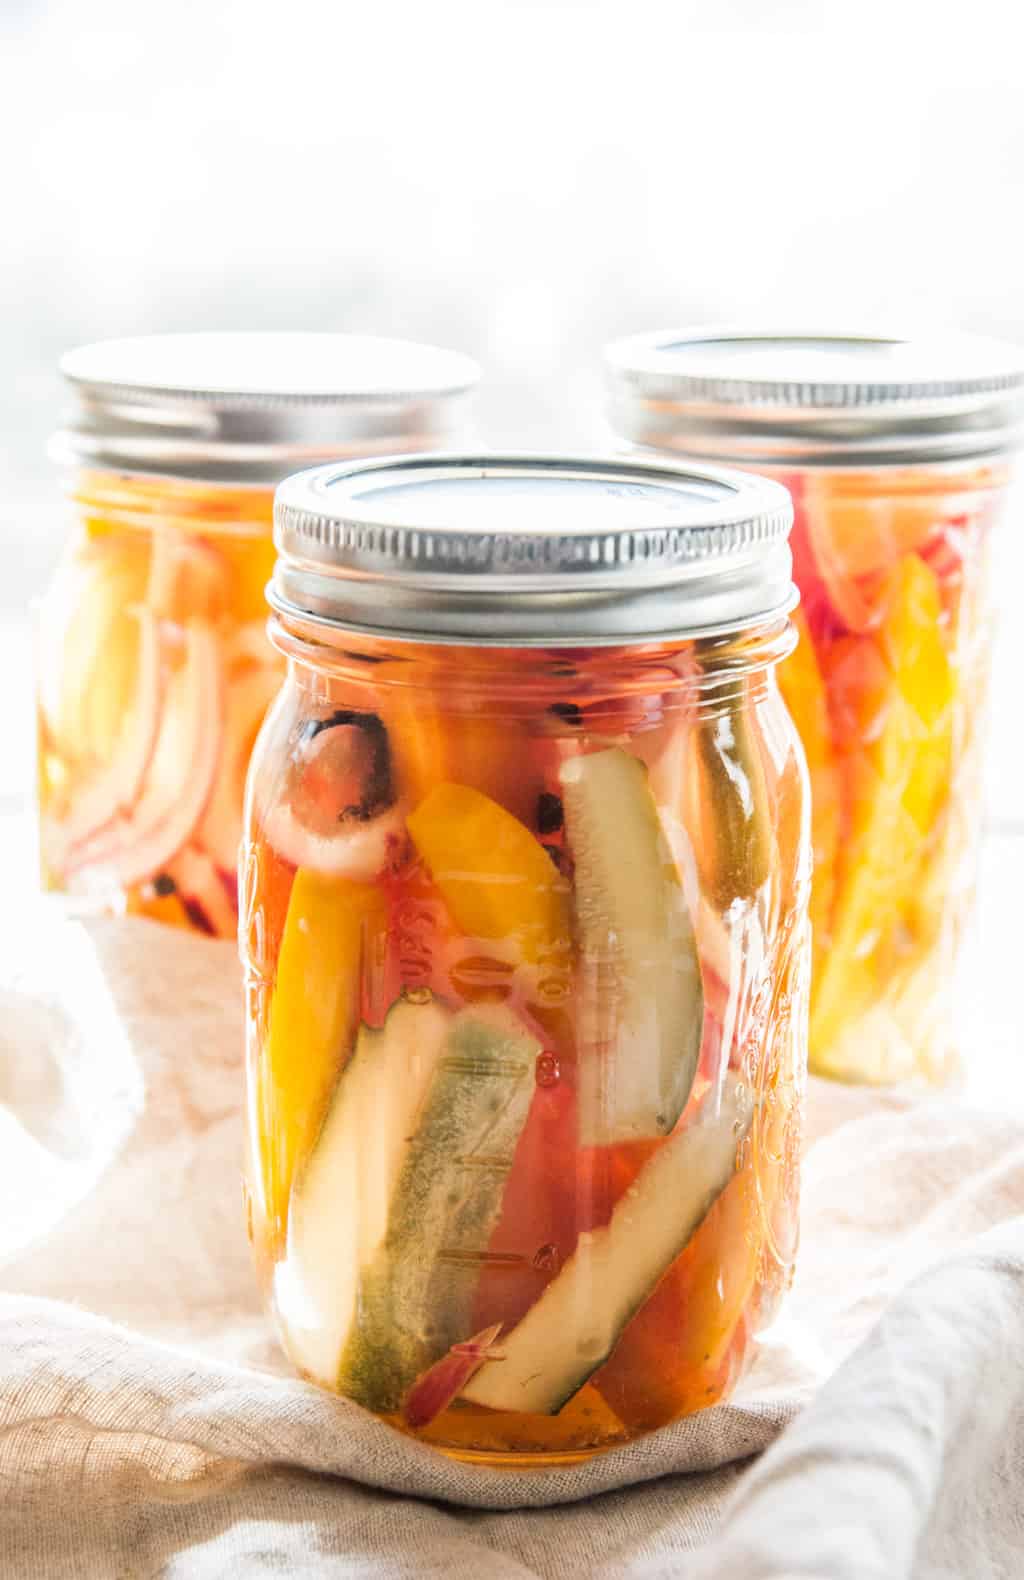 How to make quick pickled vegetables from @sweetphi